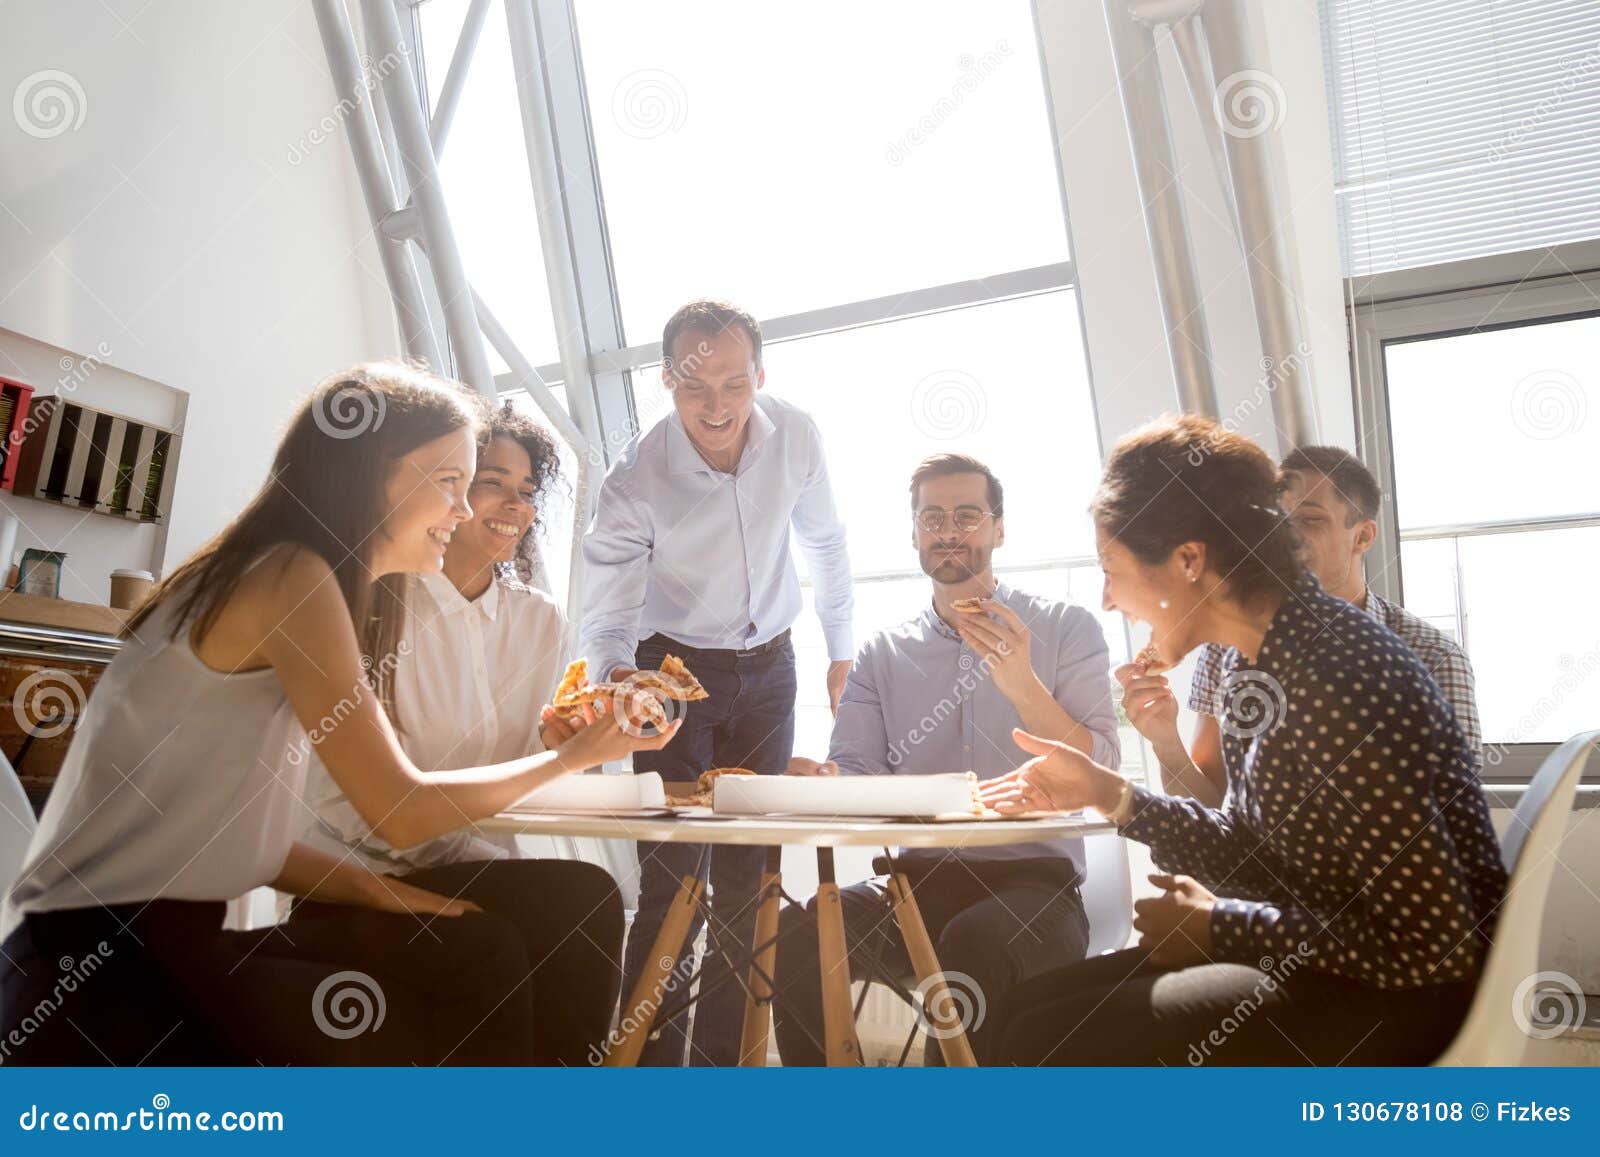 cheerful diverse team people laughing at joke eating pizza toget